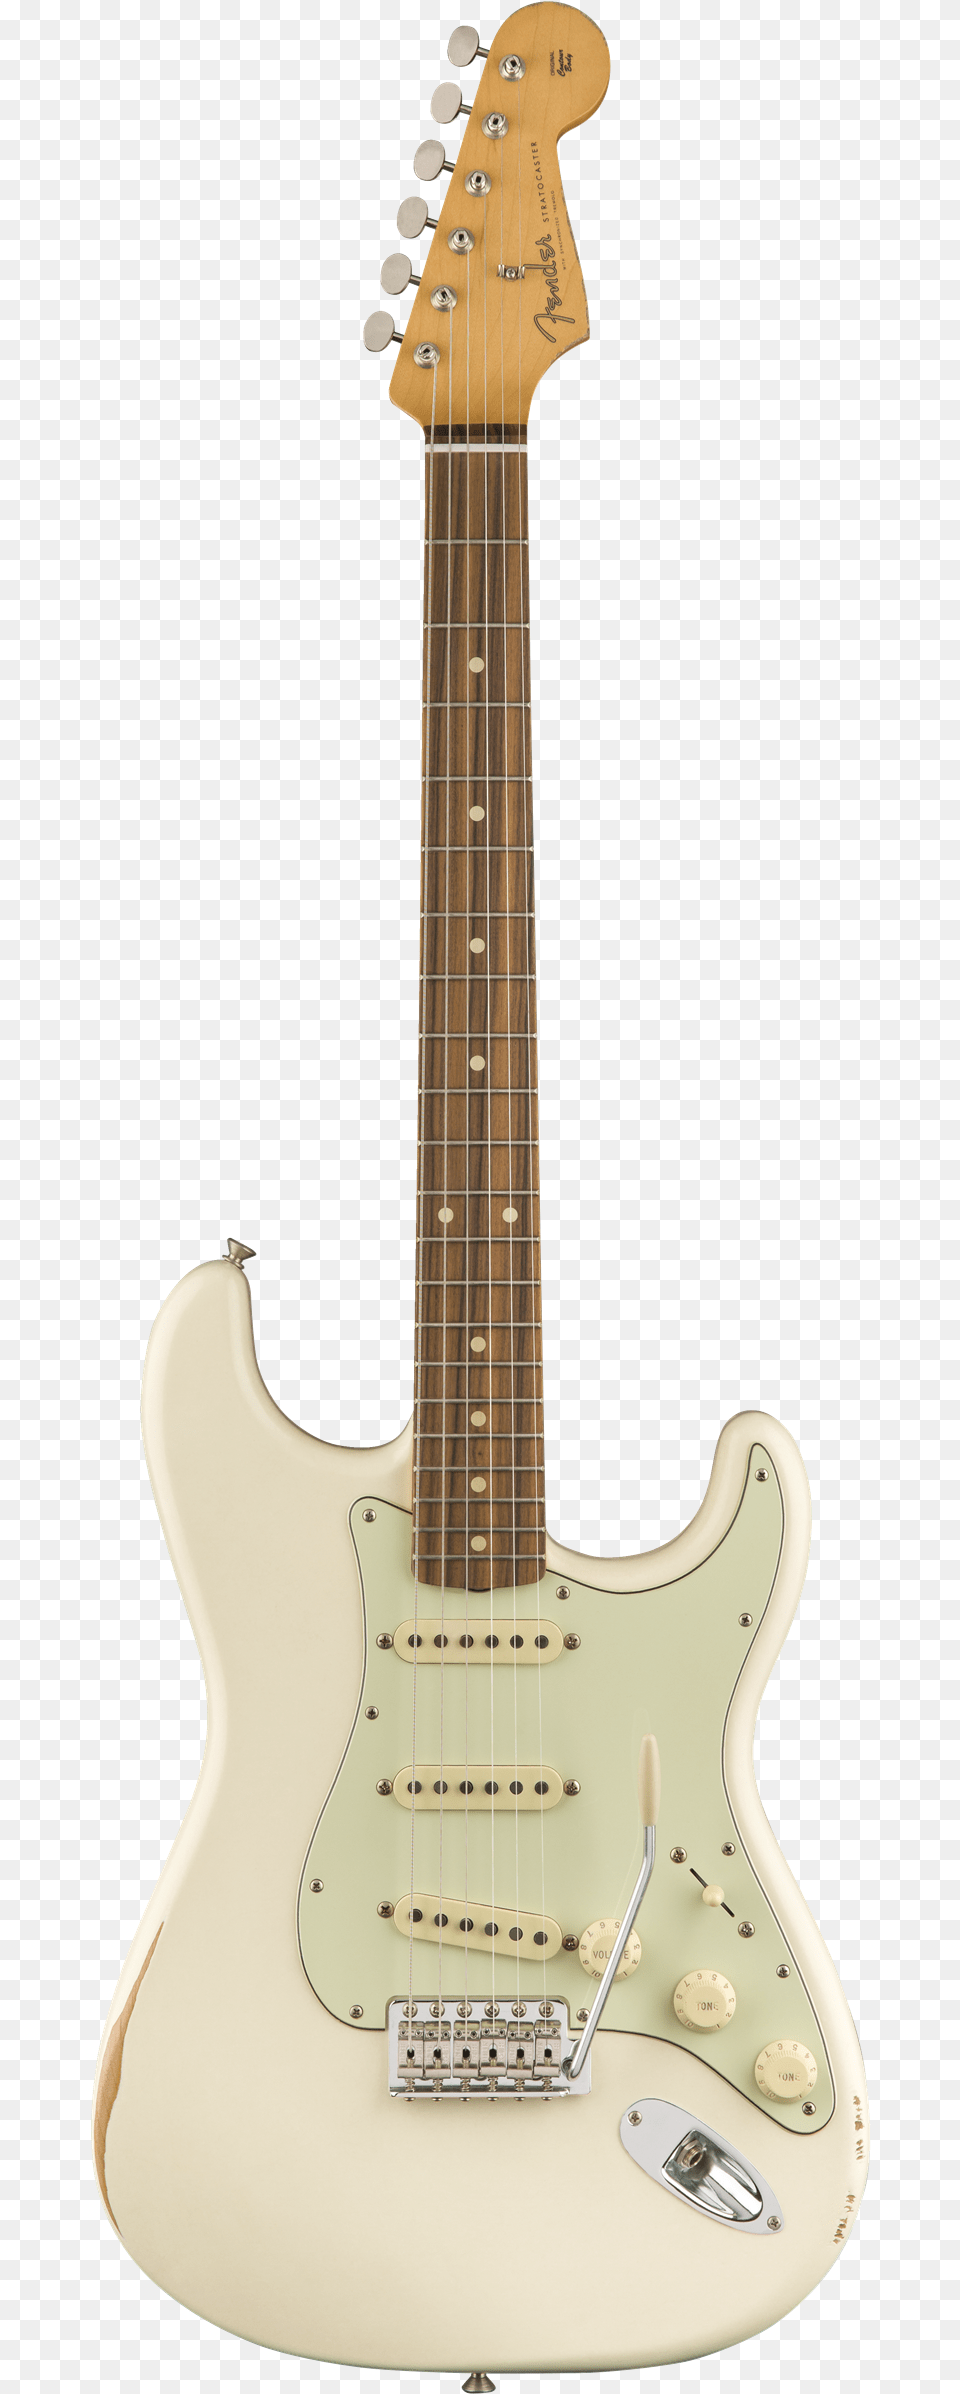 Fender Road Worn 60s Strat Oly White Front, Bass Guitar, Electric Guitar, Guitar, Musical Instrument Png Image